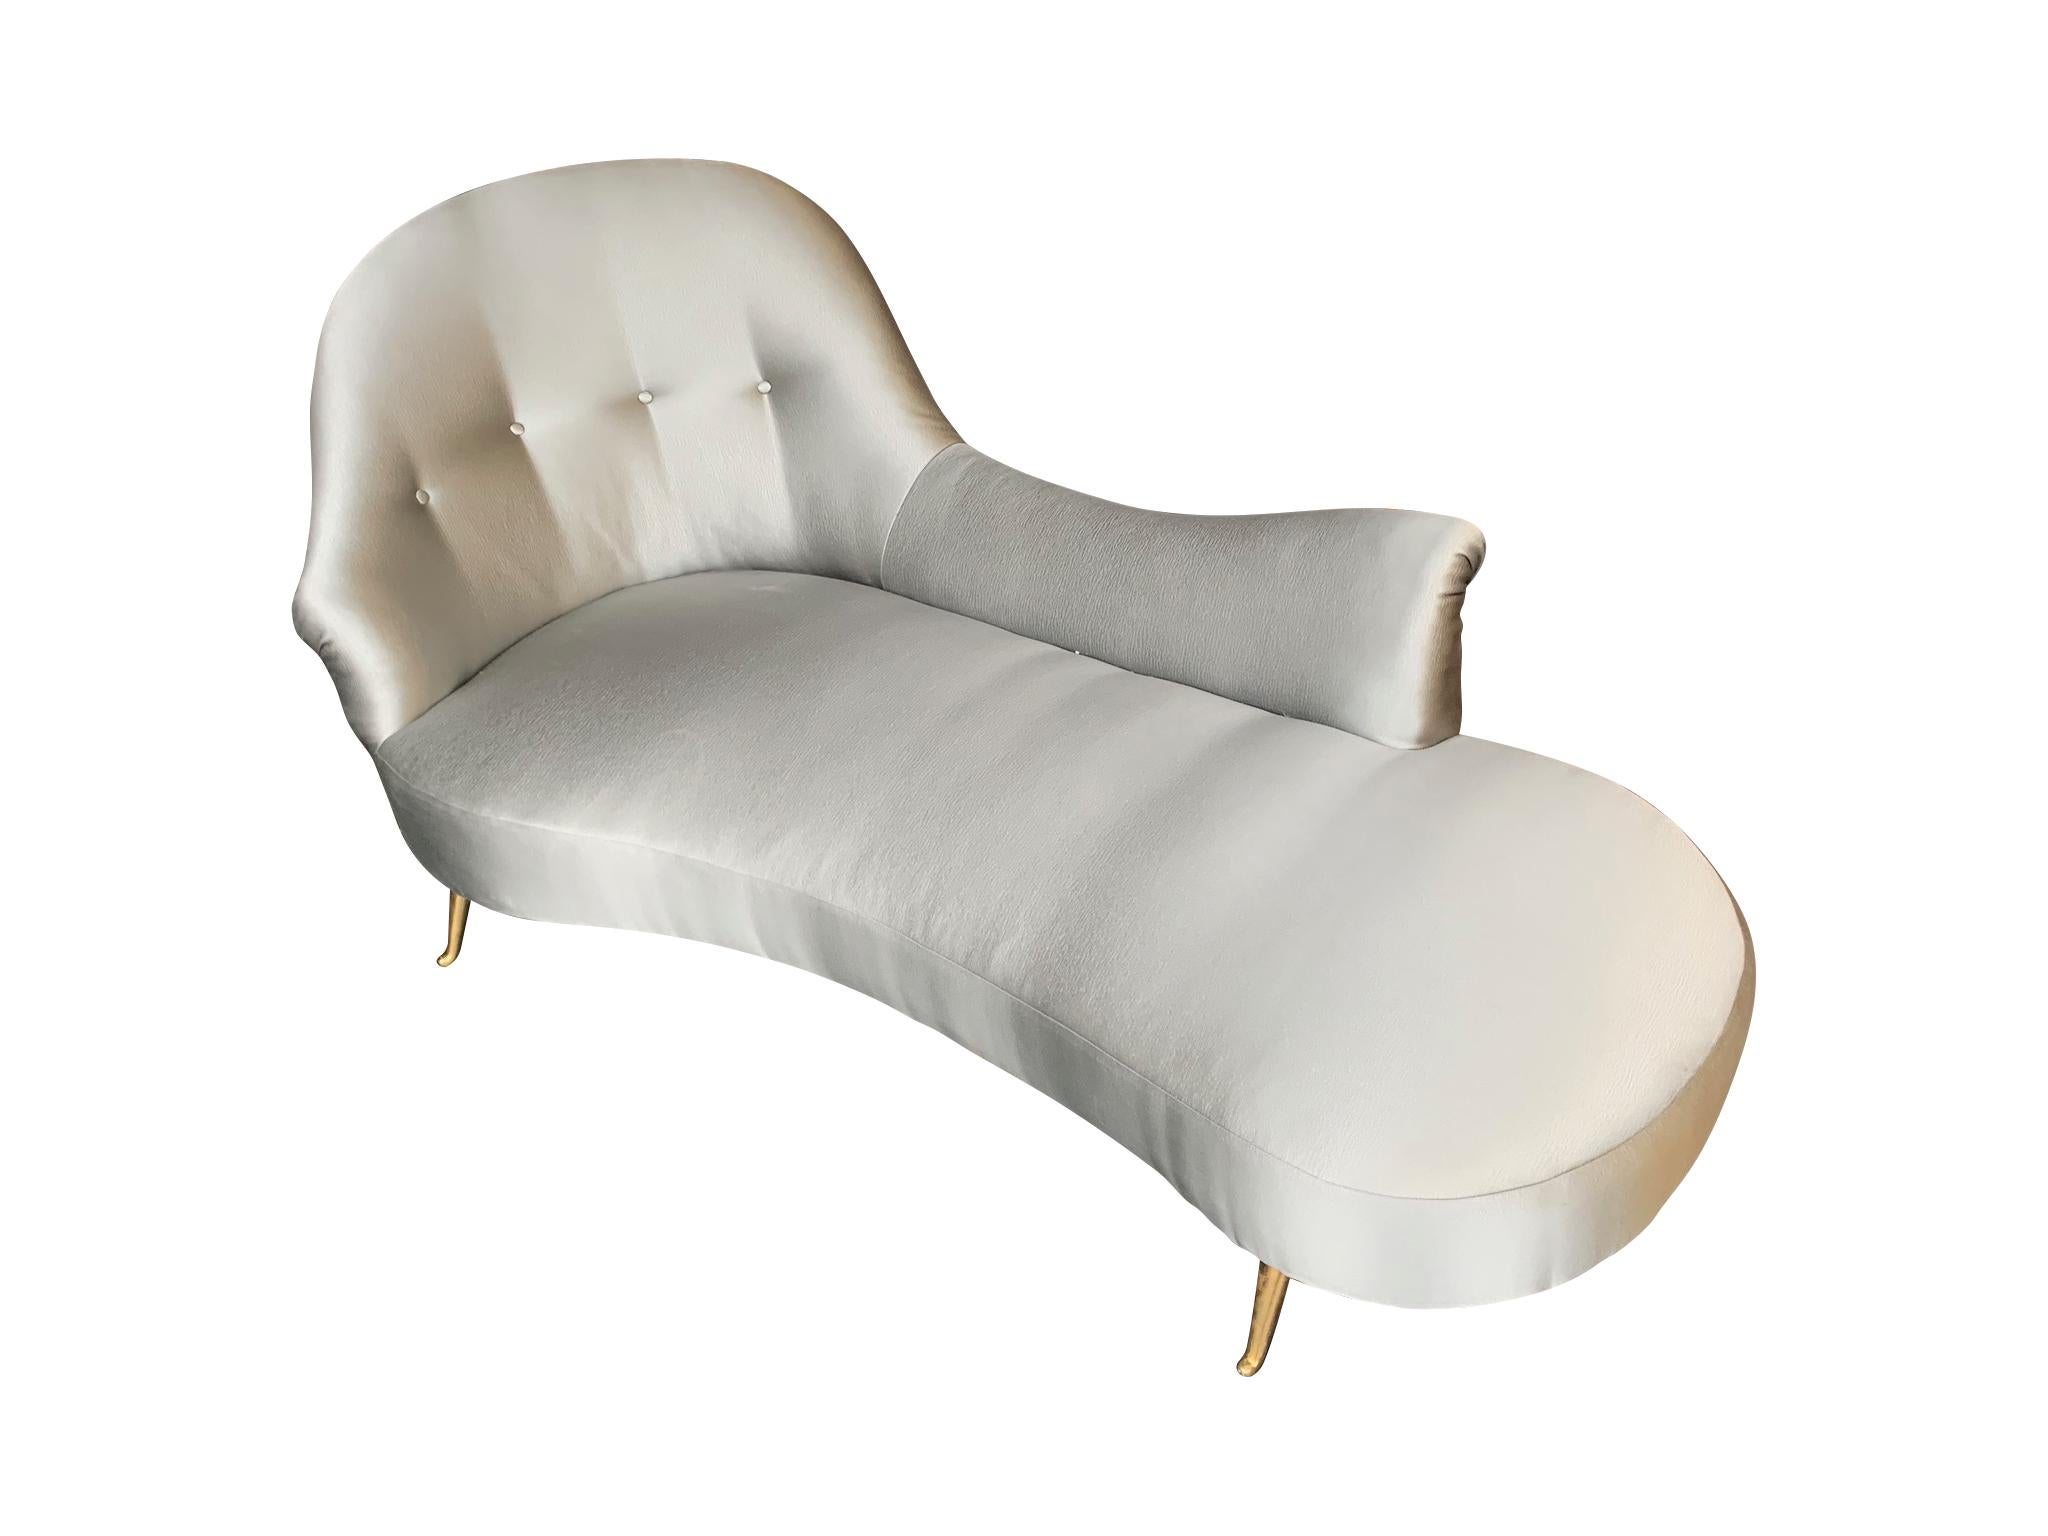 Italian Chaise Longue Upholstered in Champagne Grey Fabric with Brass Feet (Moderne der Mitte des Jahrhunderts)